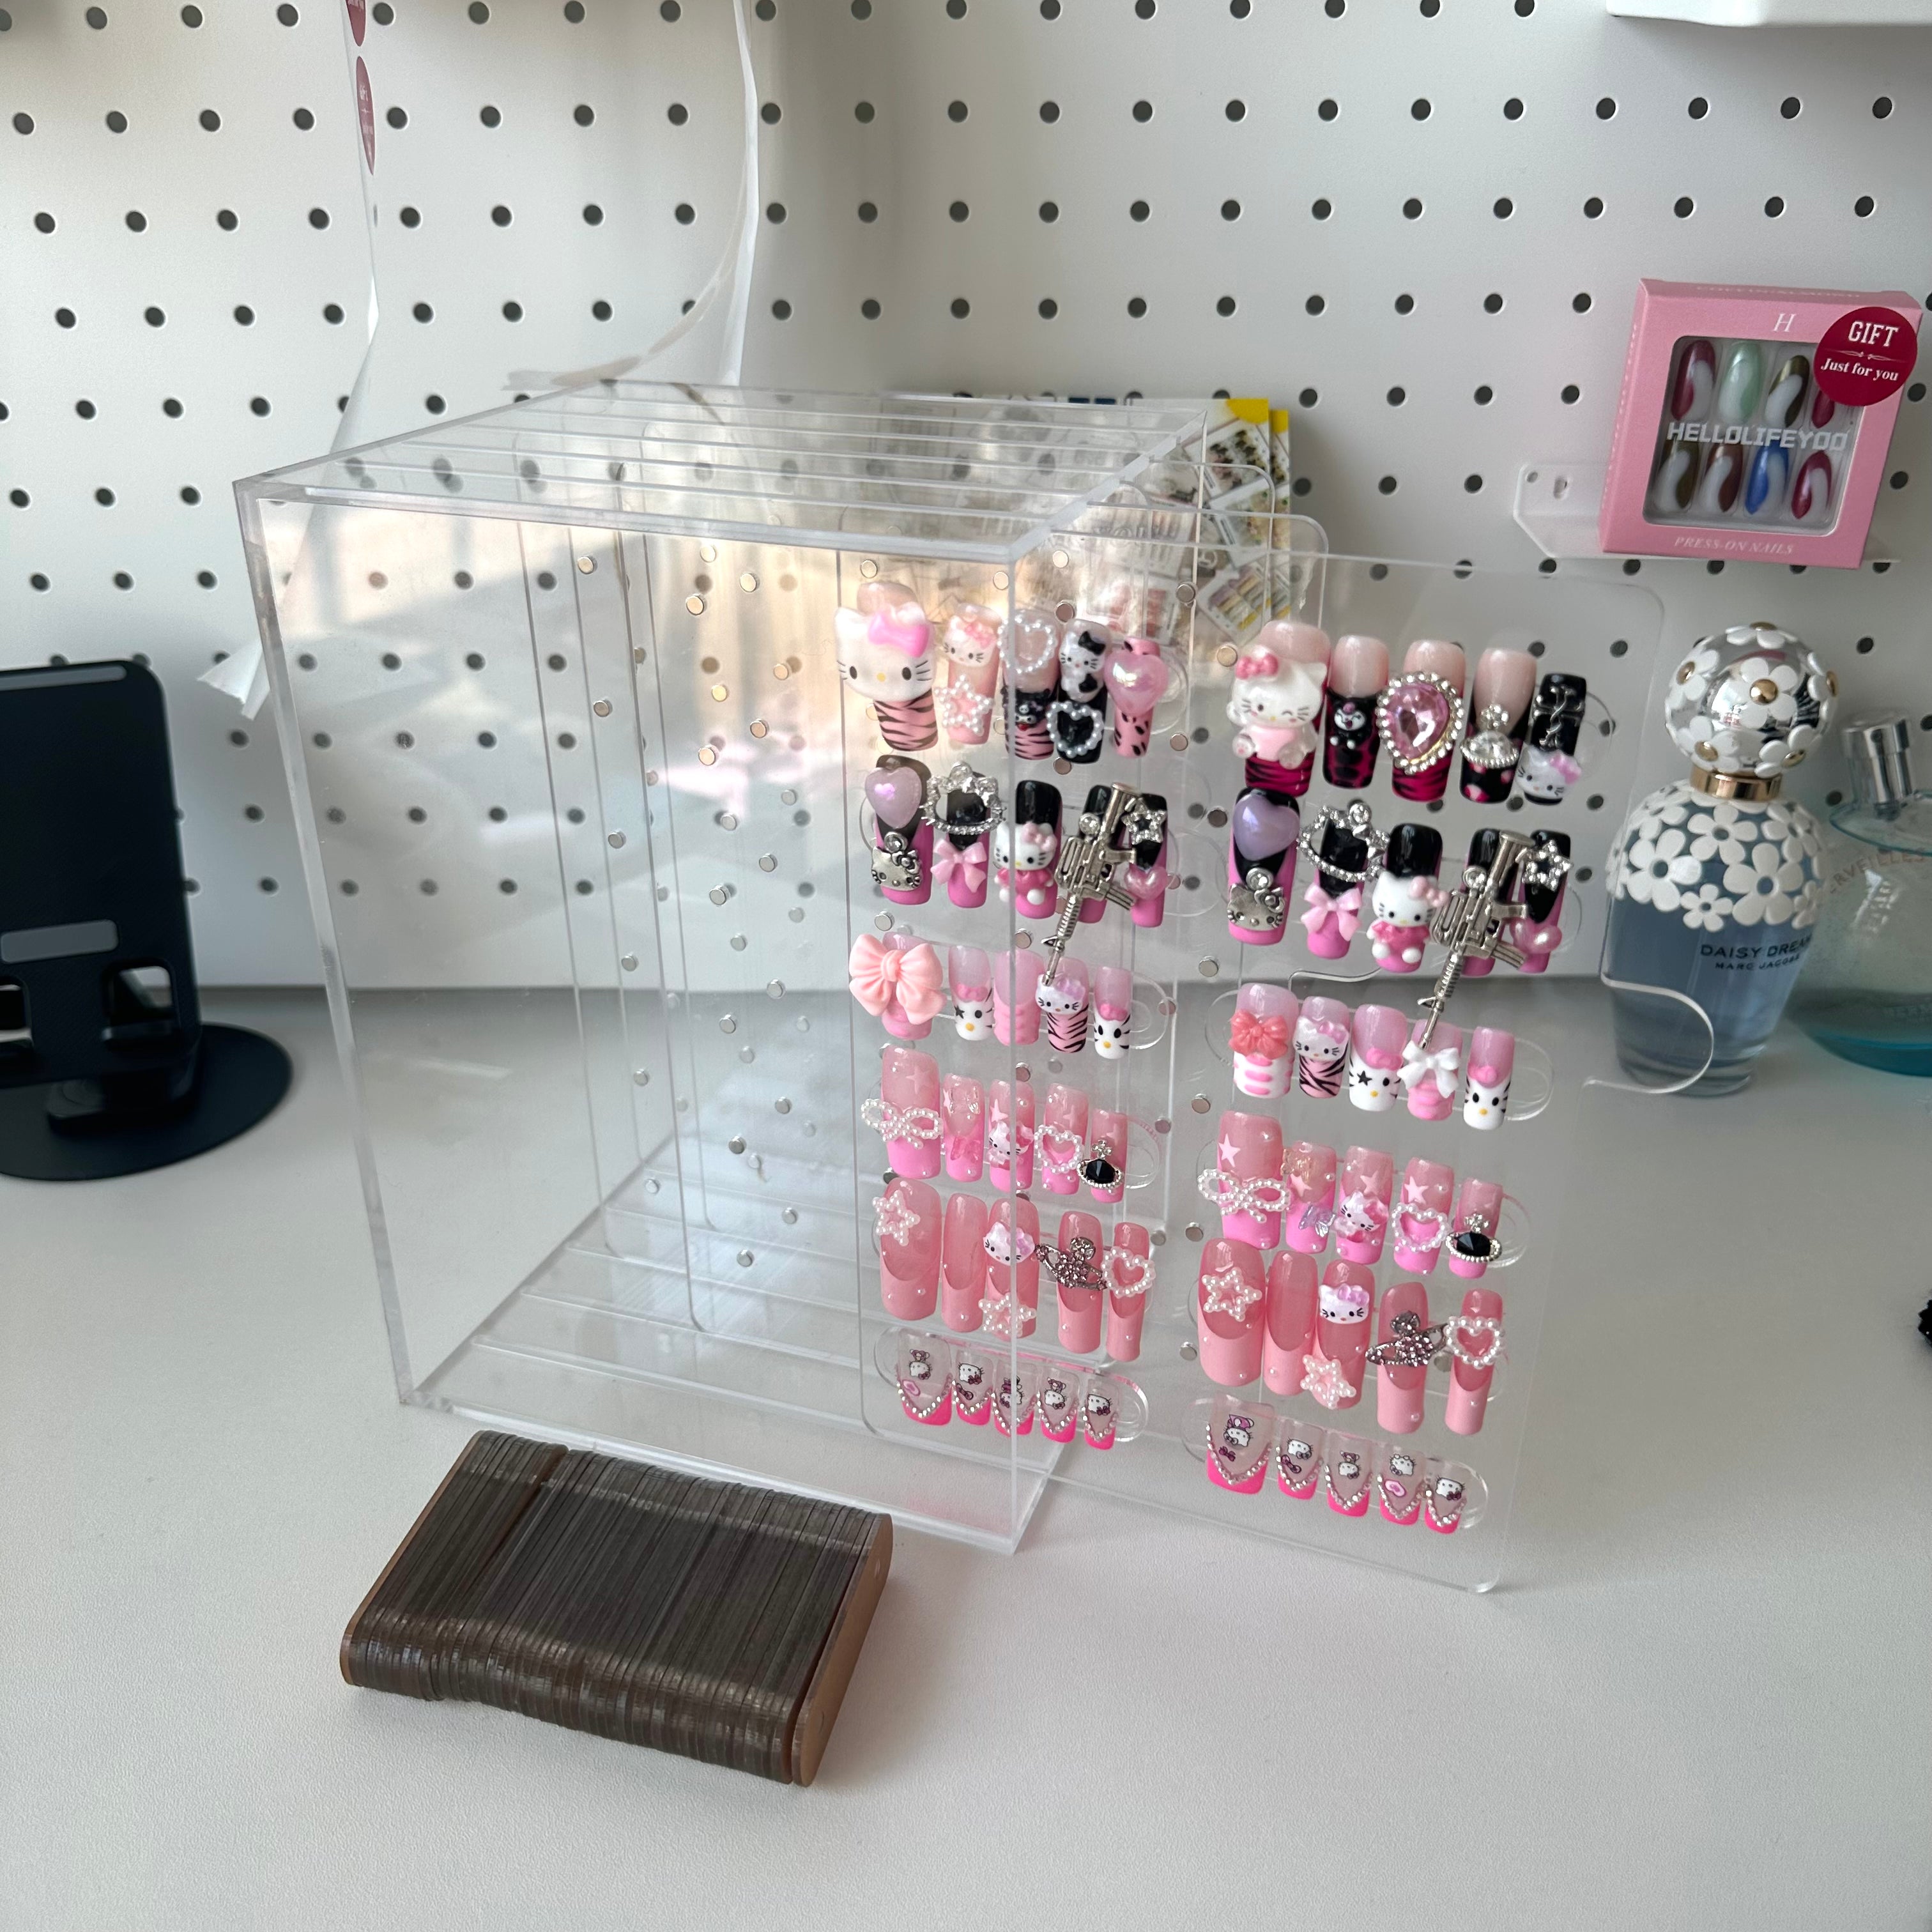 Nail Organizers and Storage 60 Lattice Nail Art Display Board Clear Acrylic Removable Magnet Adsorption Holder Shelves Display Rack Stand for Nail Art